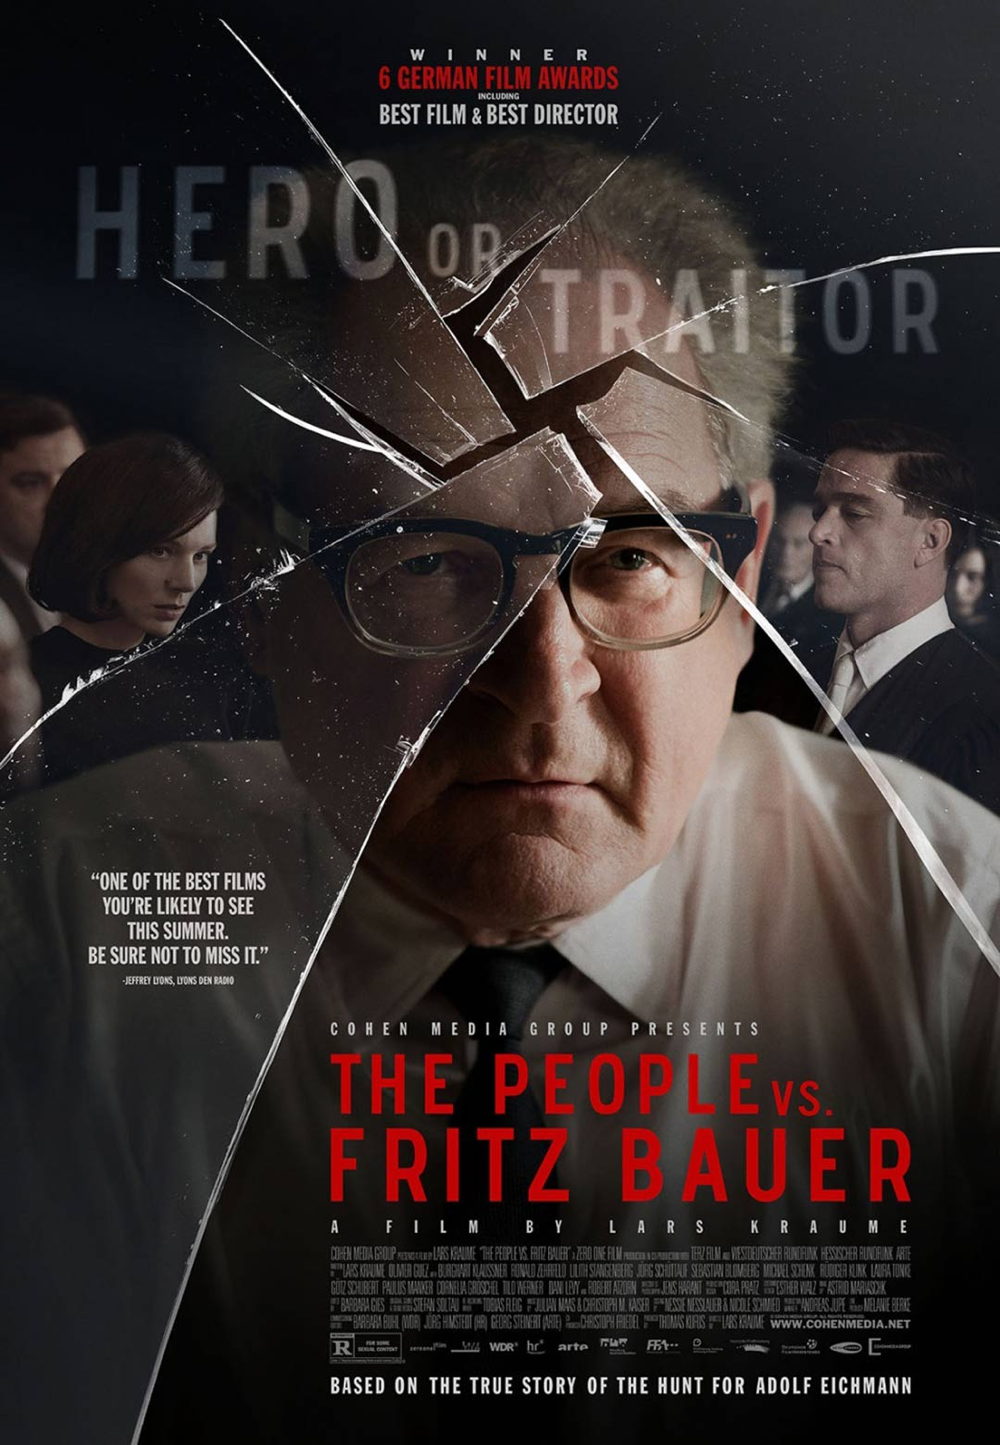 moviegoer.com: THE PEOPLE VS FRITZ BAUER movie poster